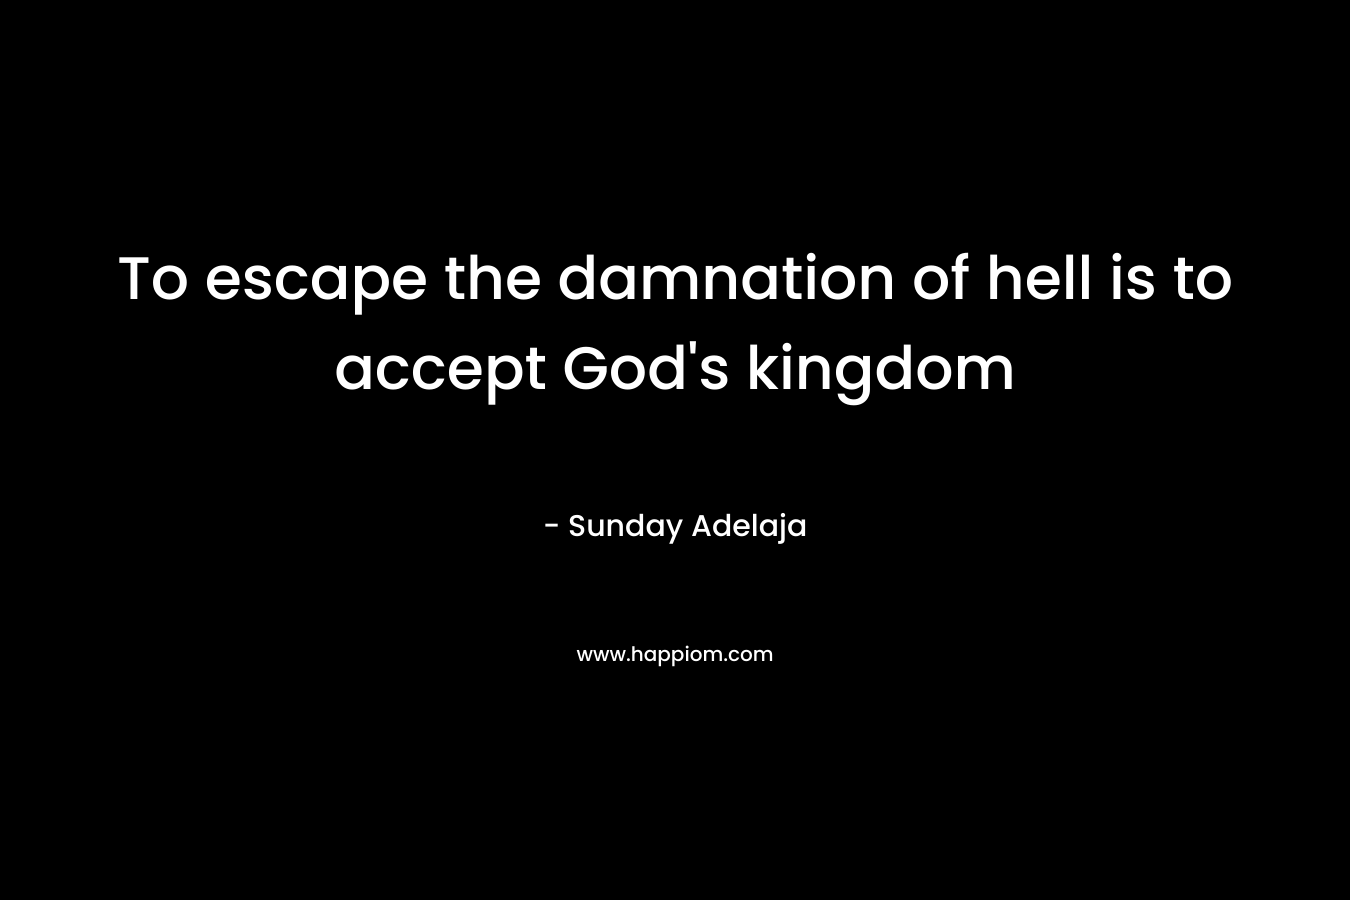 To escape the damnation of hell is to accept God's kingdom